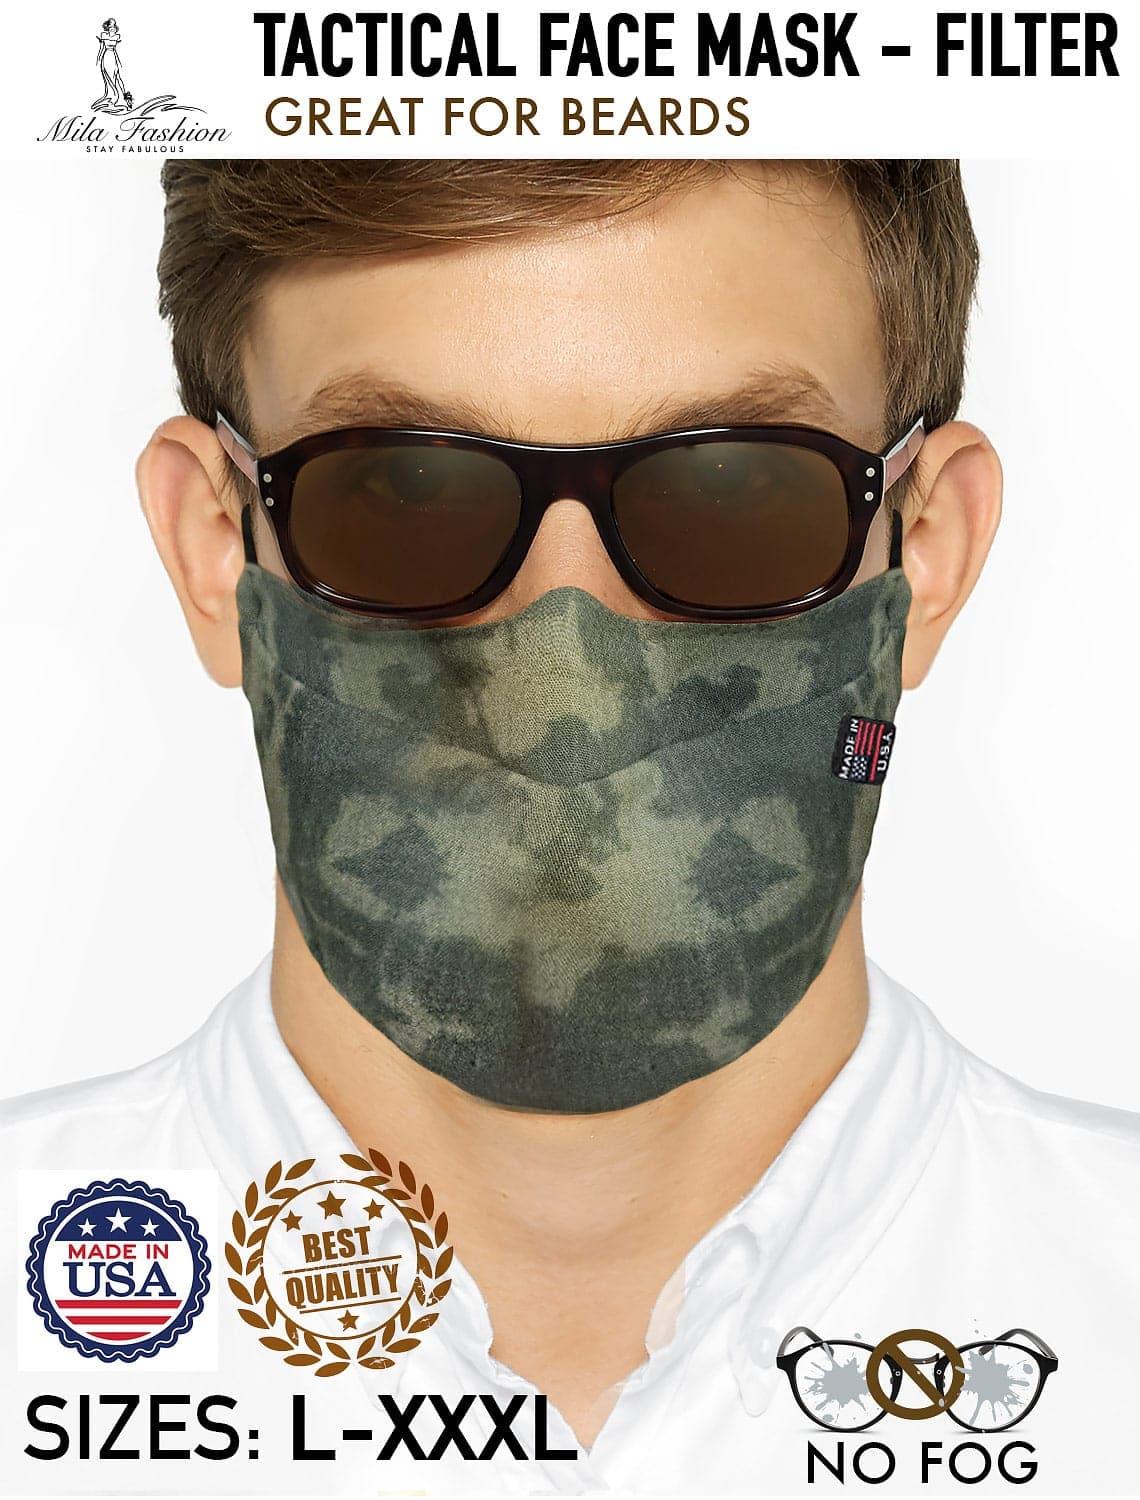 Camouflage 100% Organic Cotton Reusable Full Coverage Facemask For Men XL- XXL – 3XL